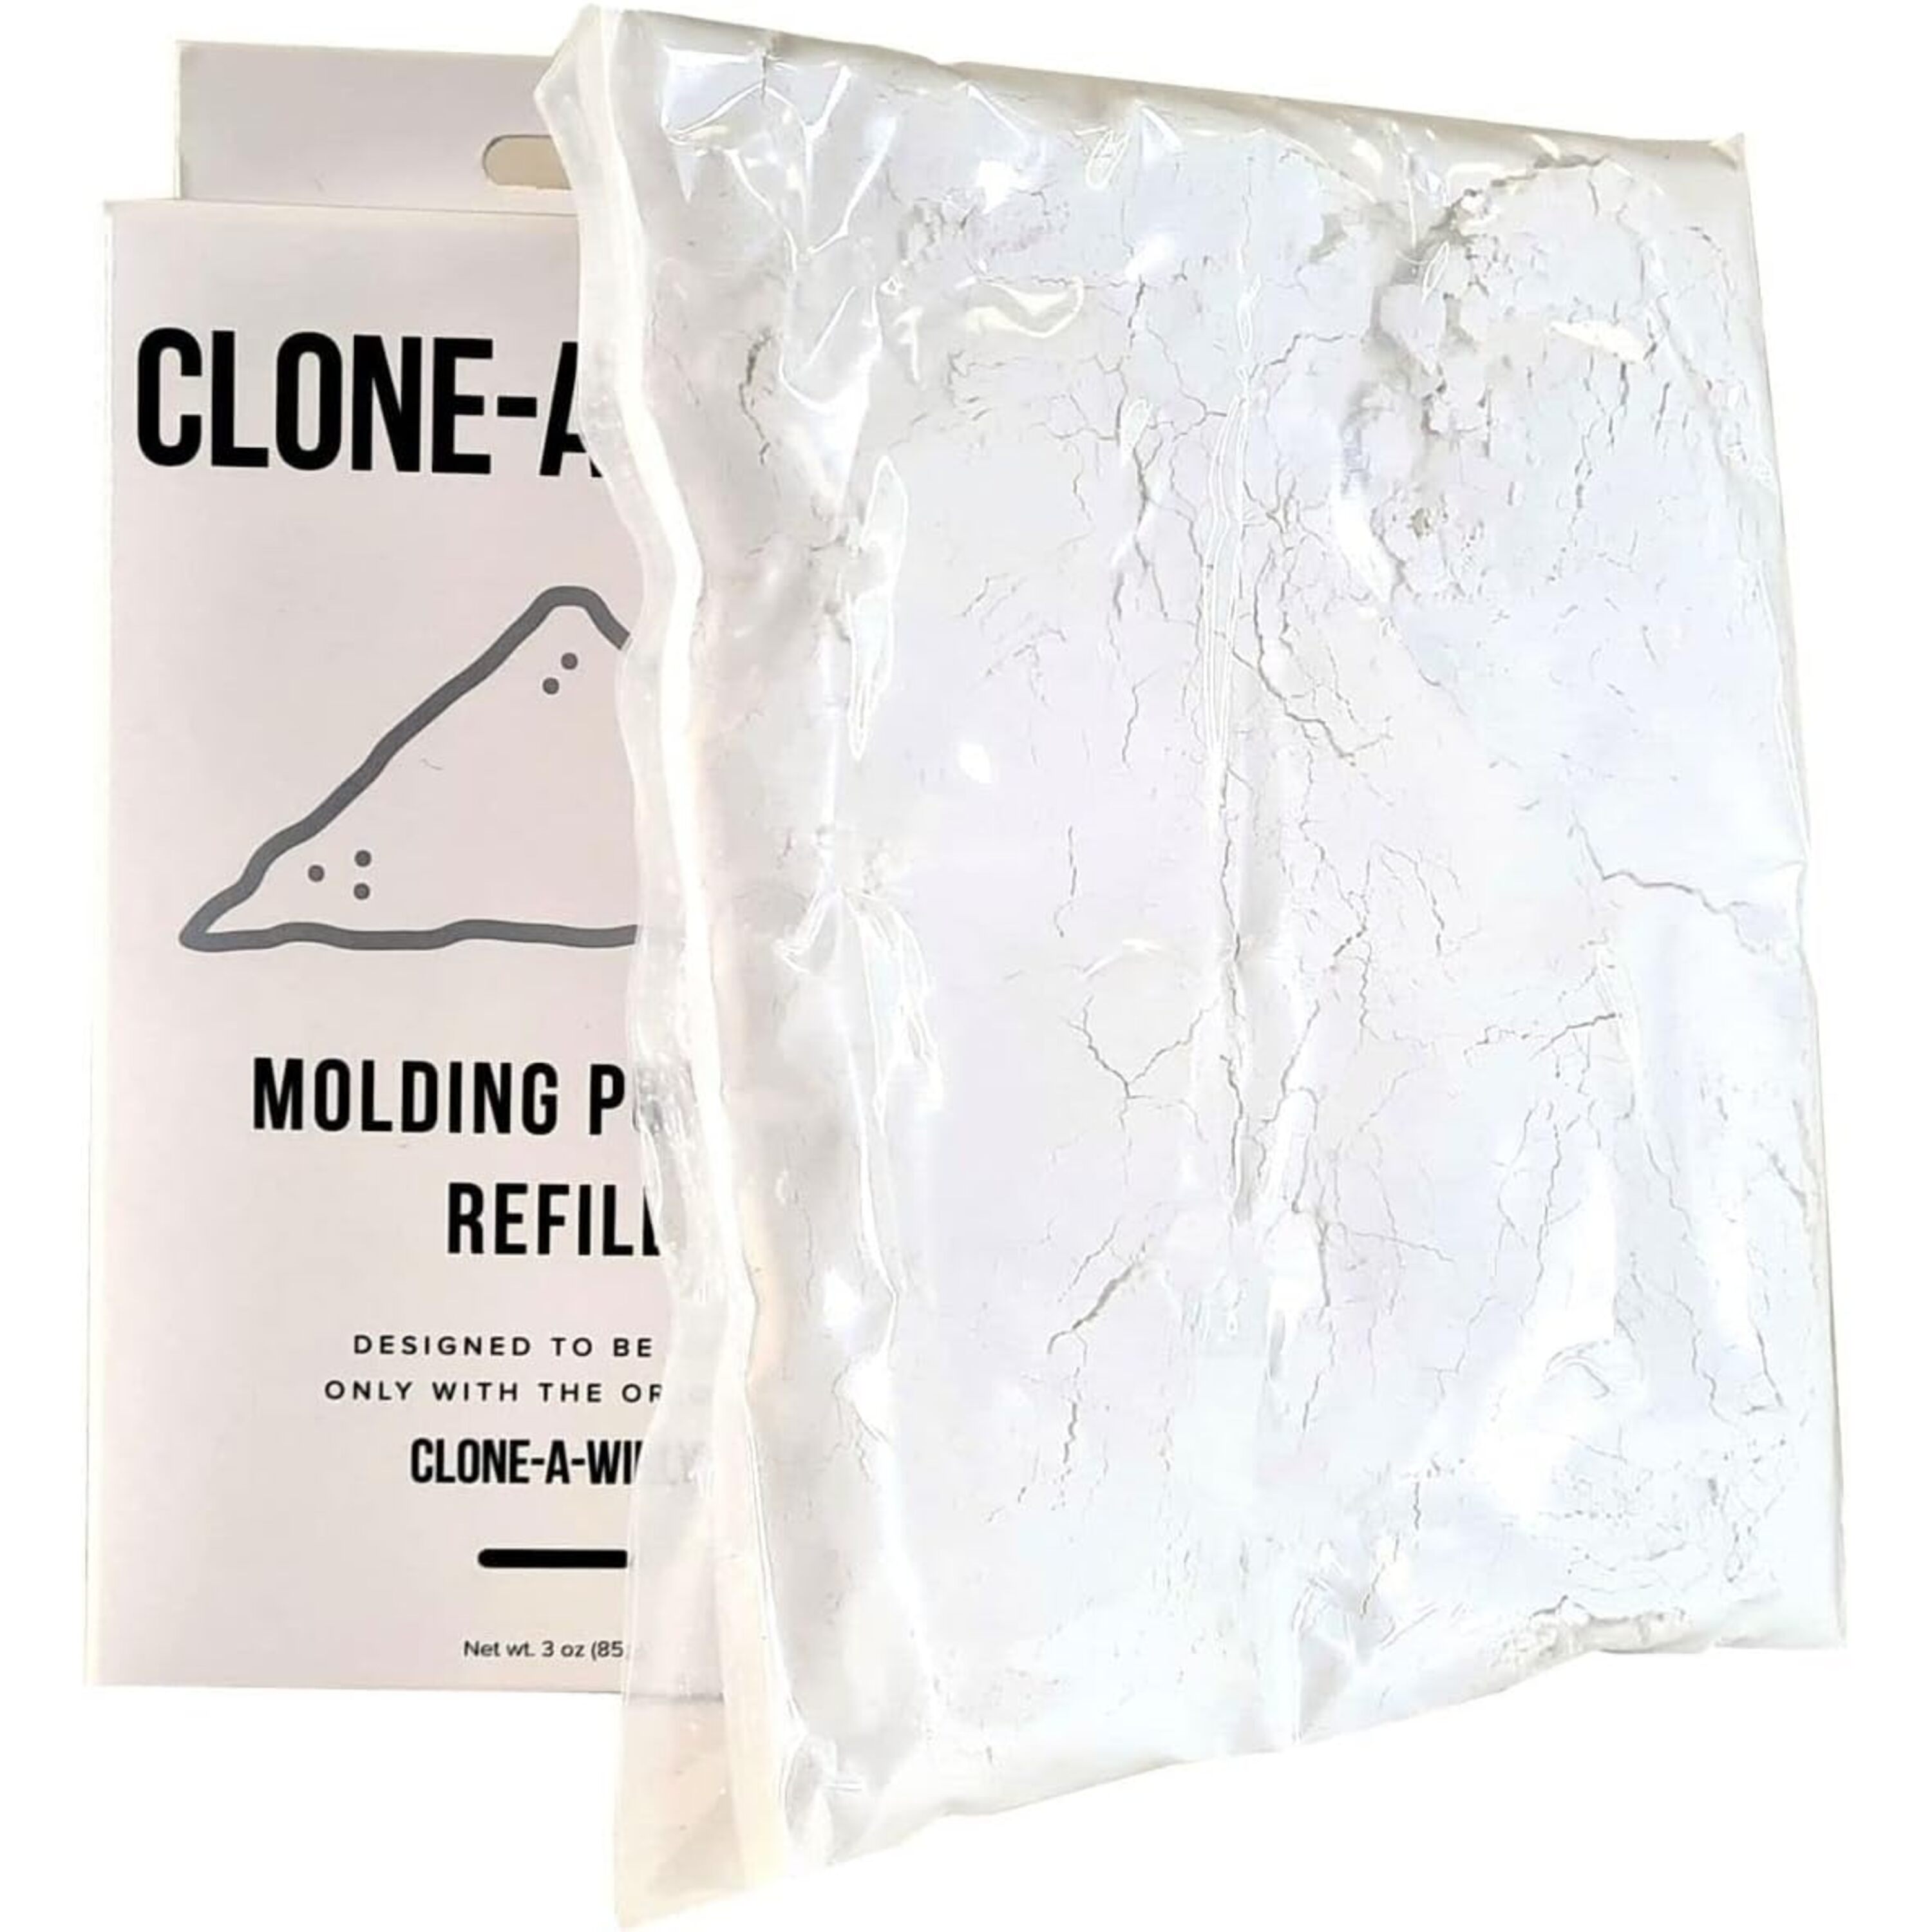 Clone-A-Willy Molding Powder Refill Bag (No Vibe)